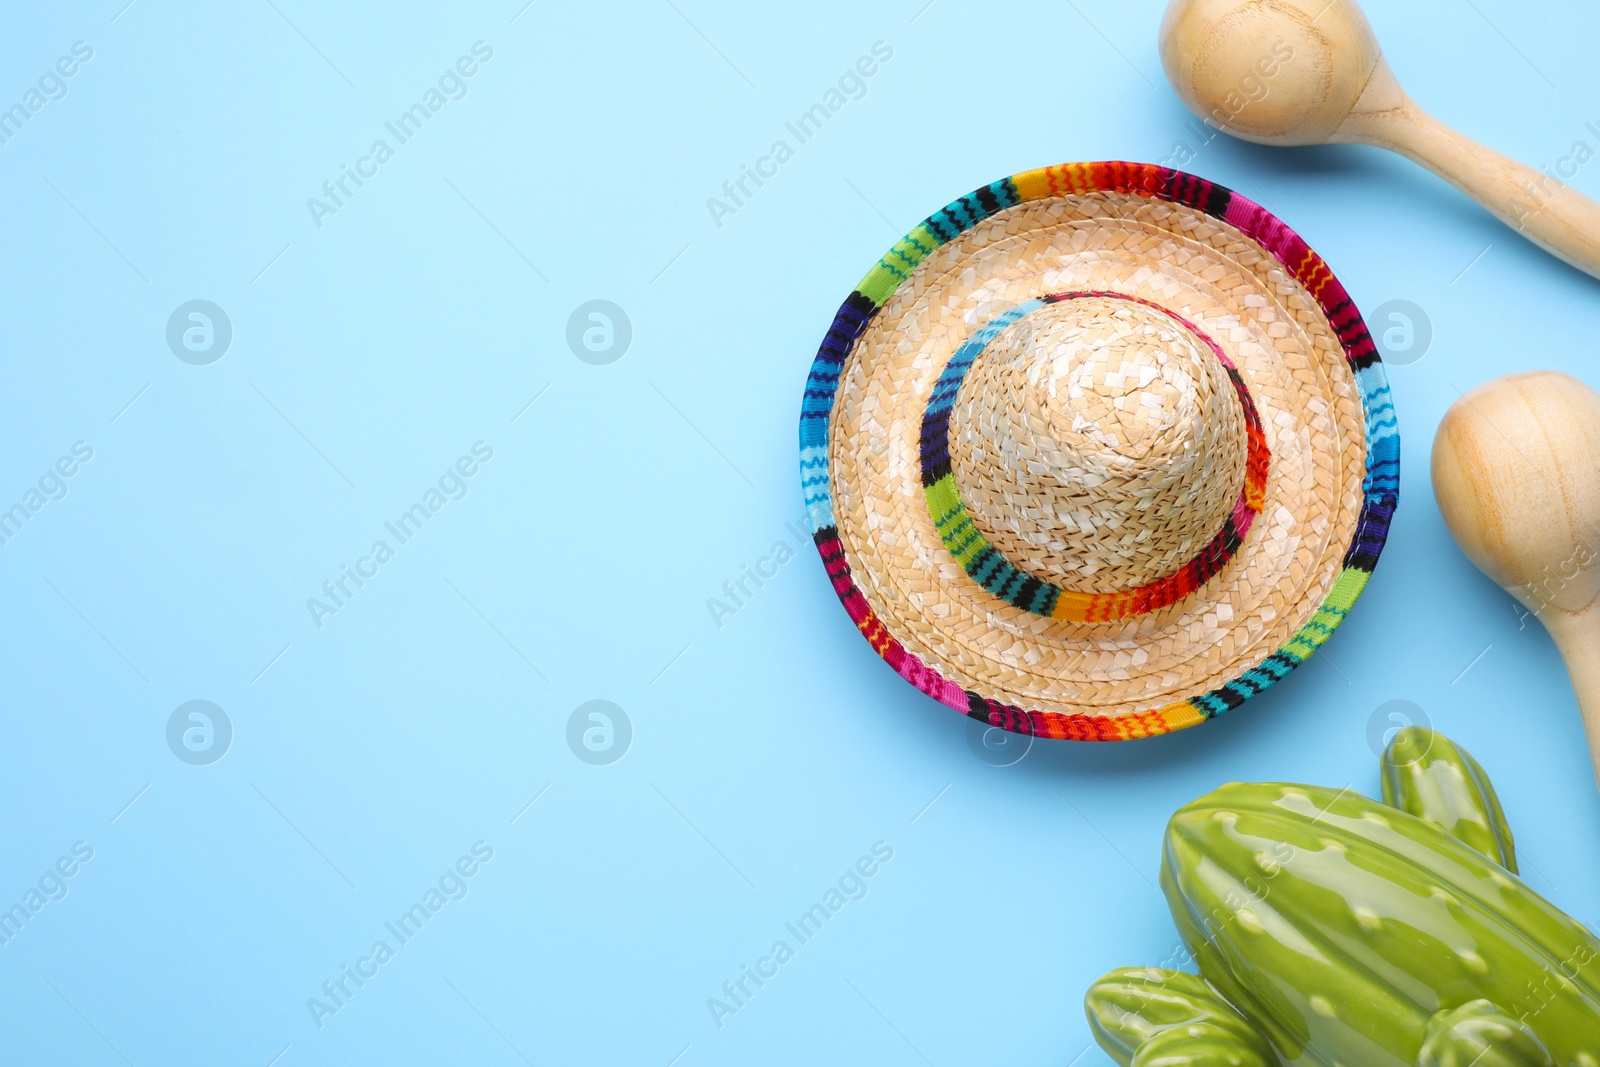 Photo of Wooden maracas, toy cactus and sombrero hat on light blue background, flat lay with space for text. Musical instrument